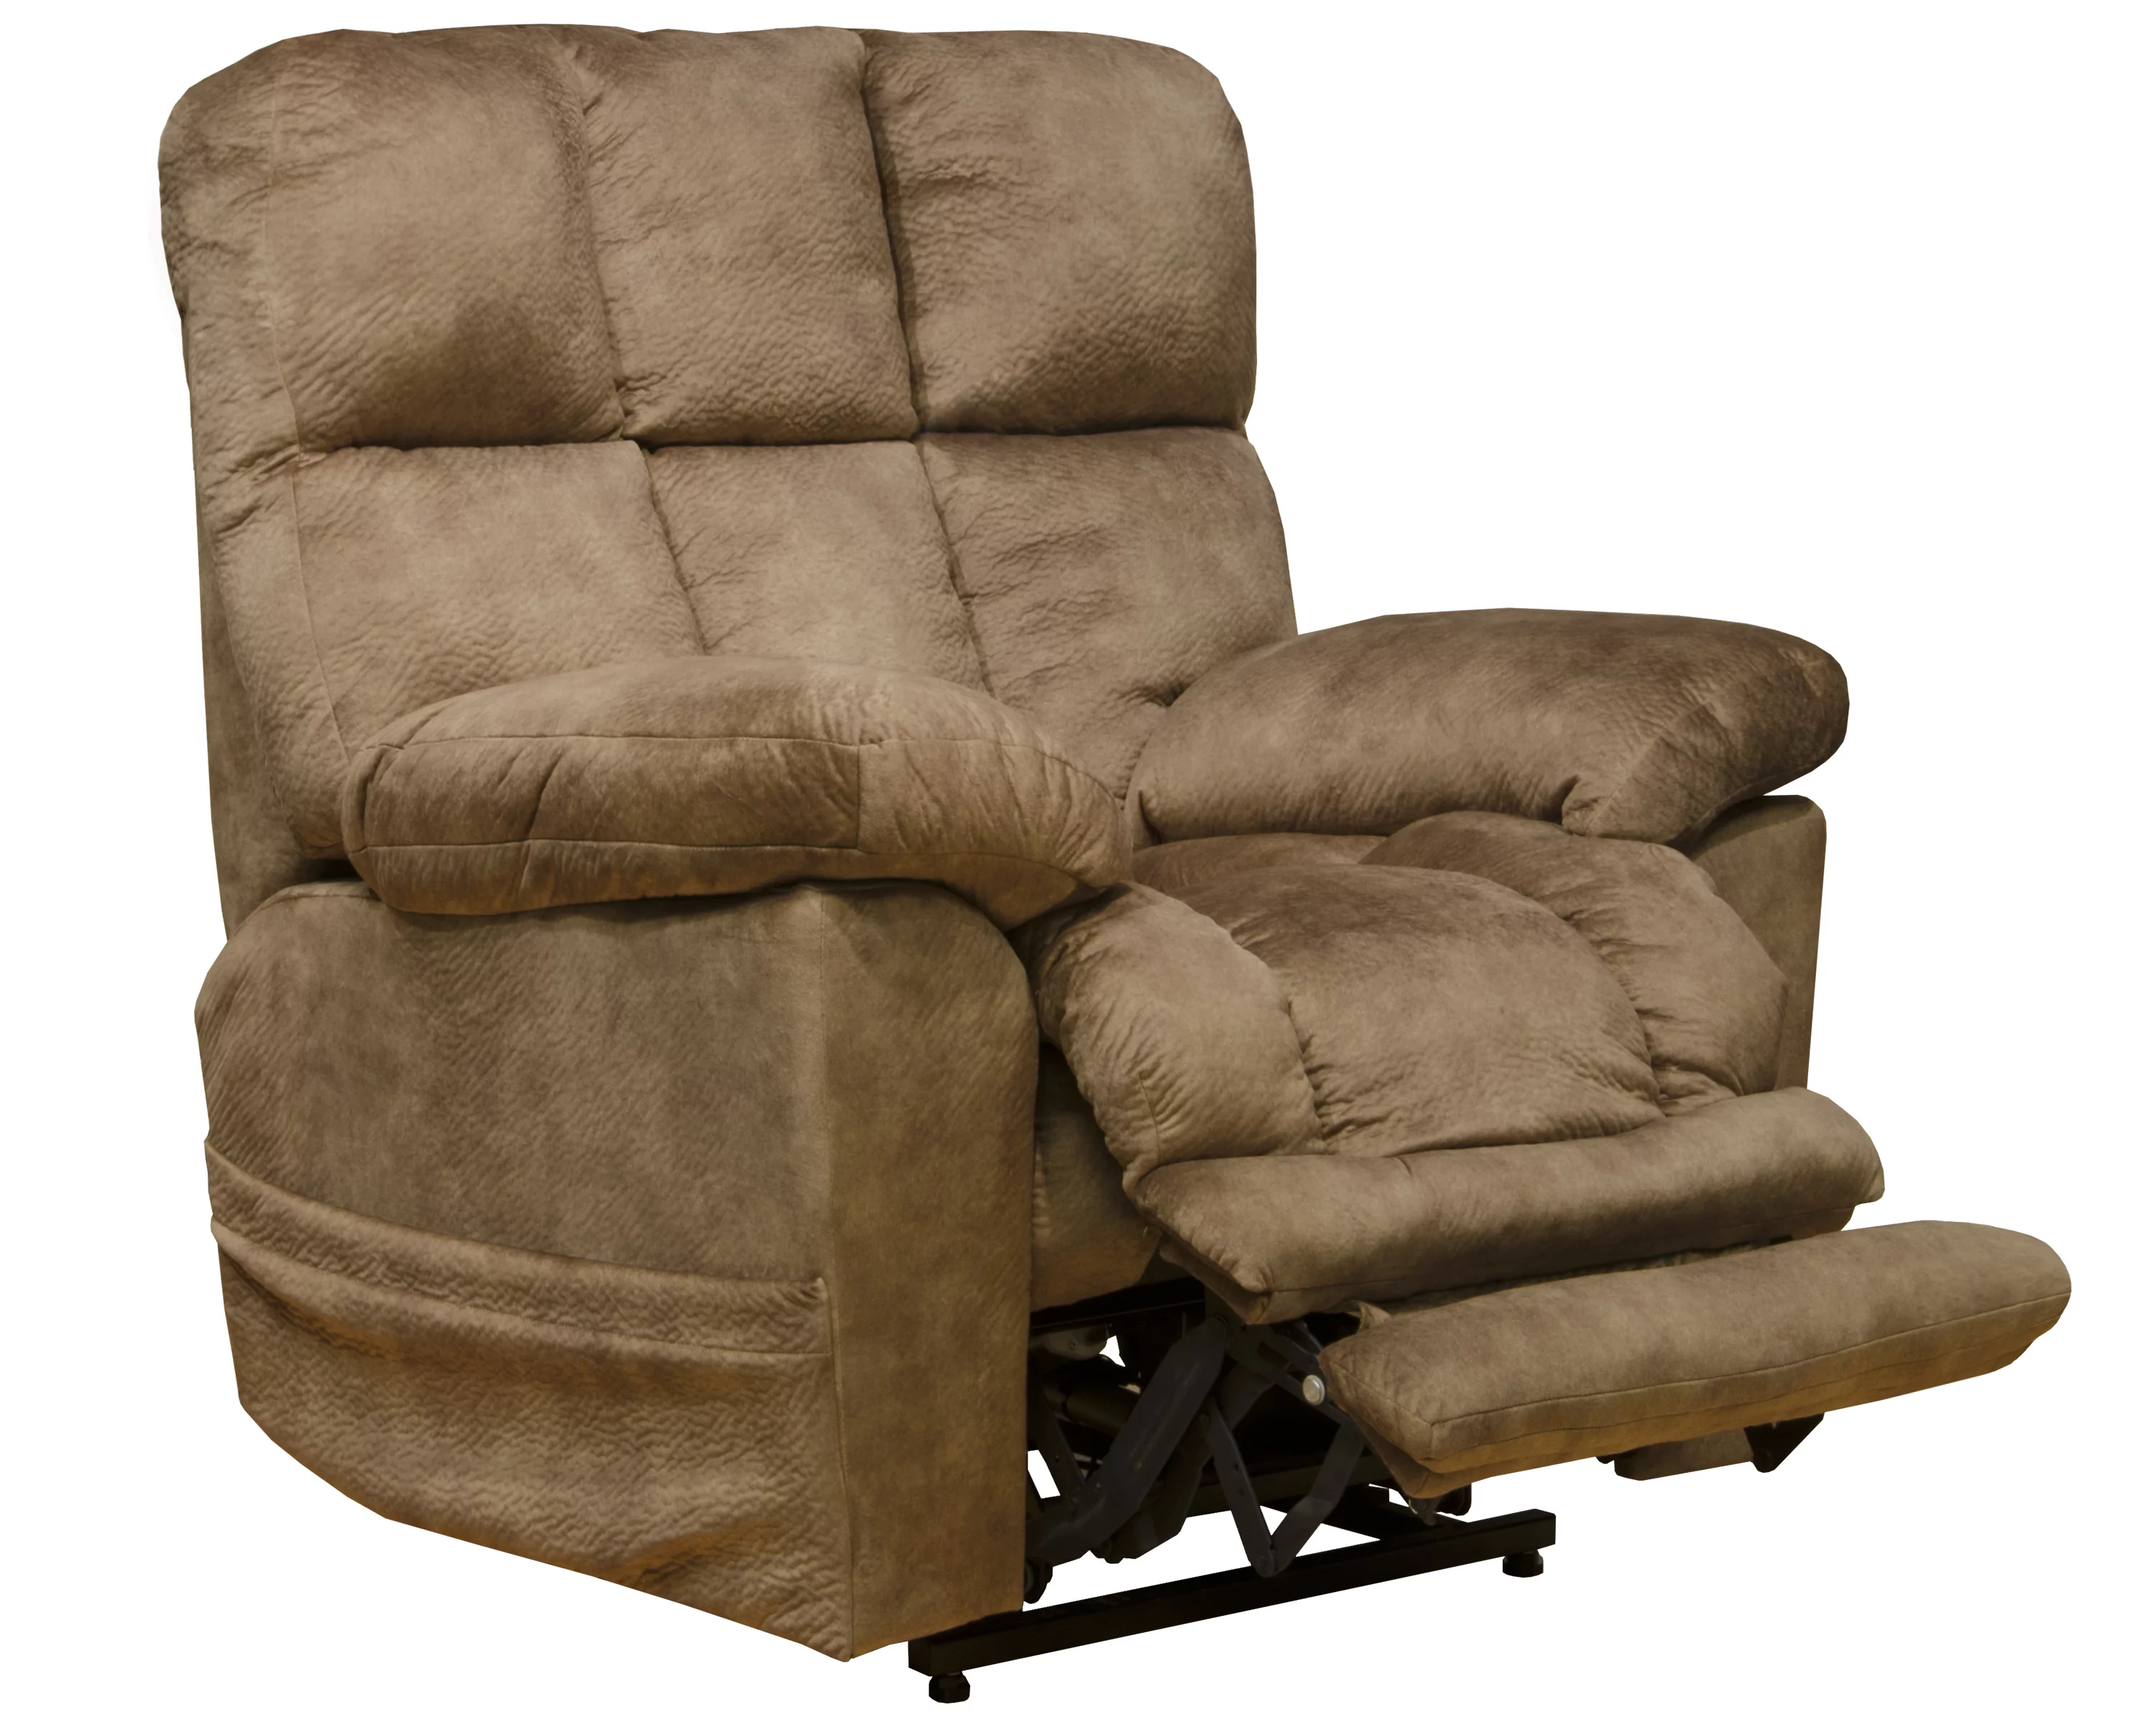 How To Take Apart A Catnapper Recliner